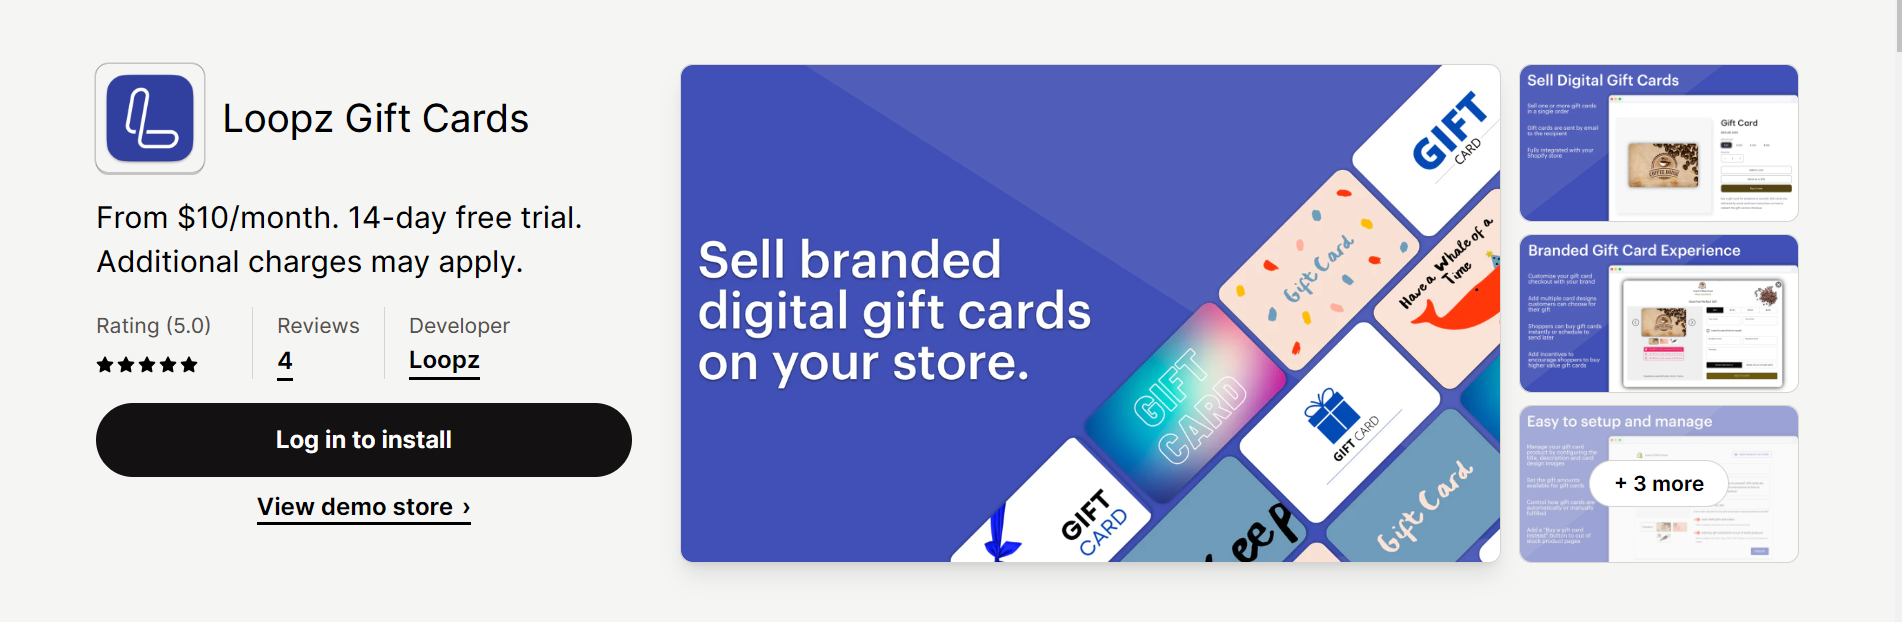 Loopz Gift Cards